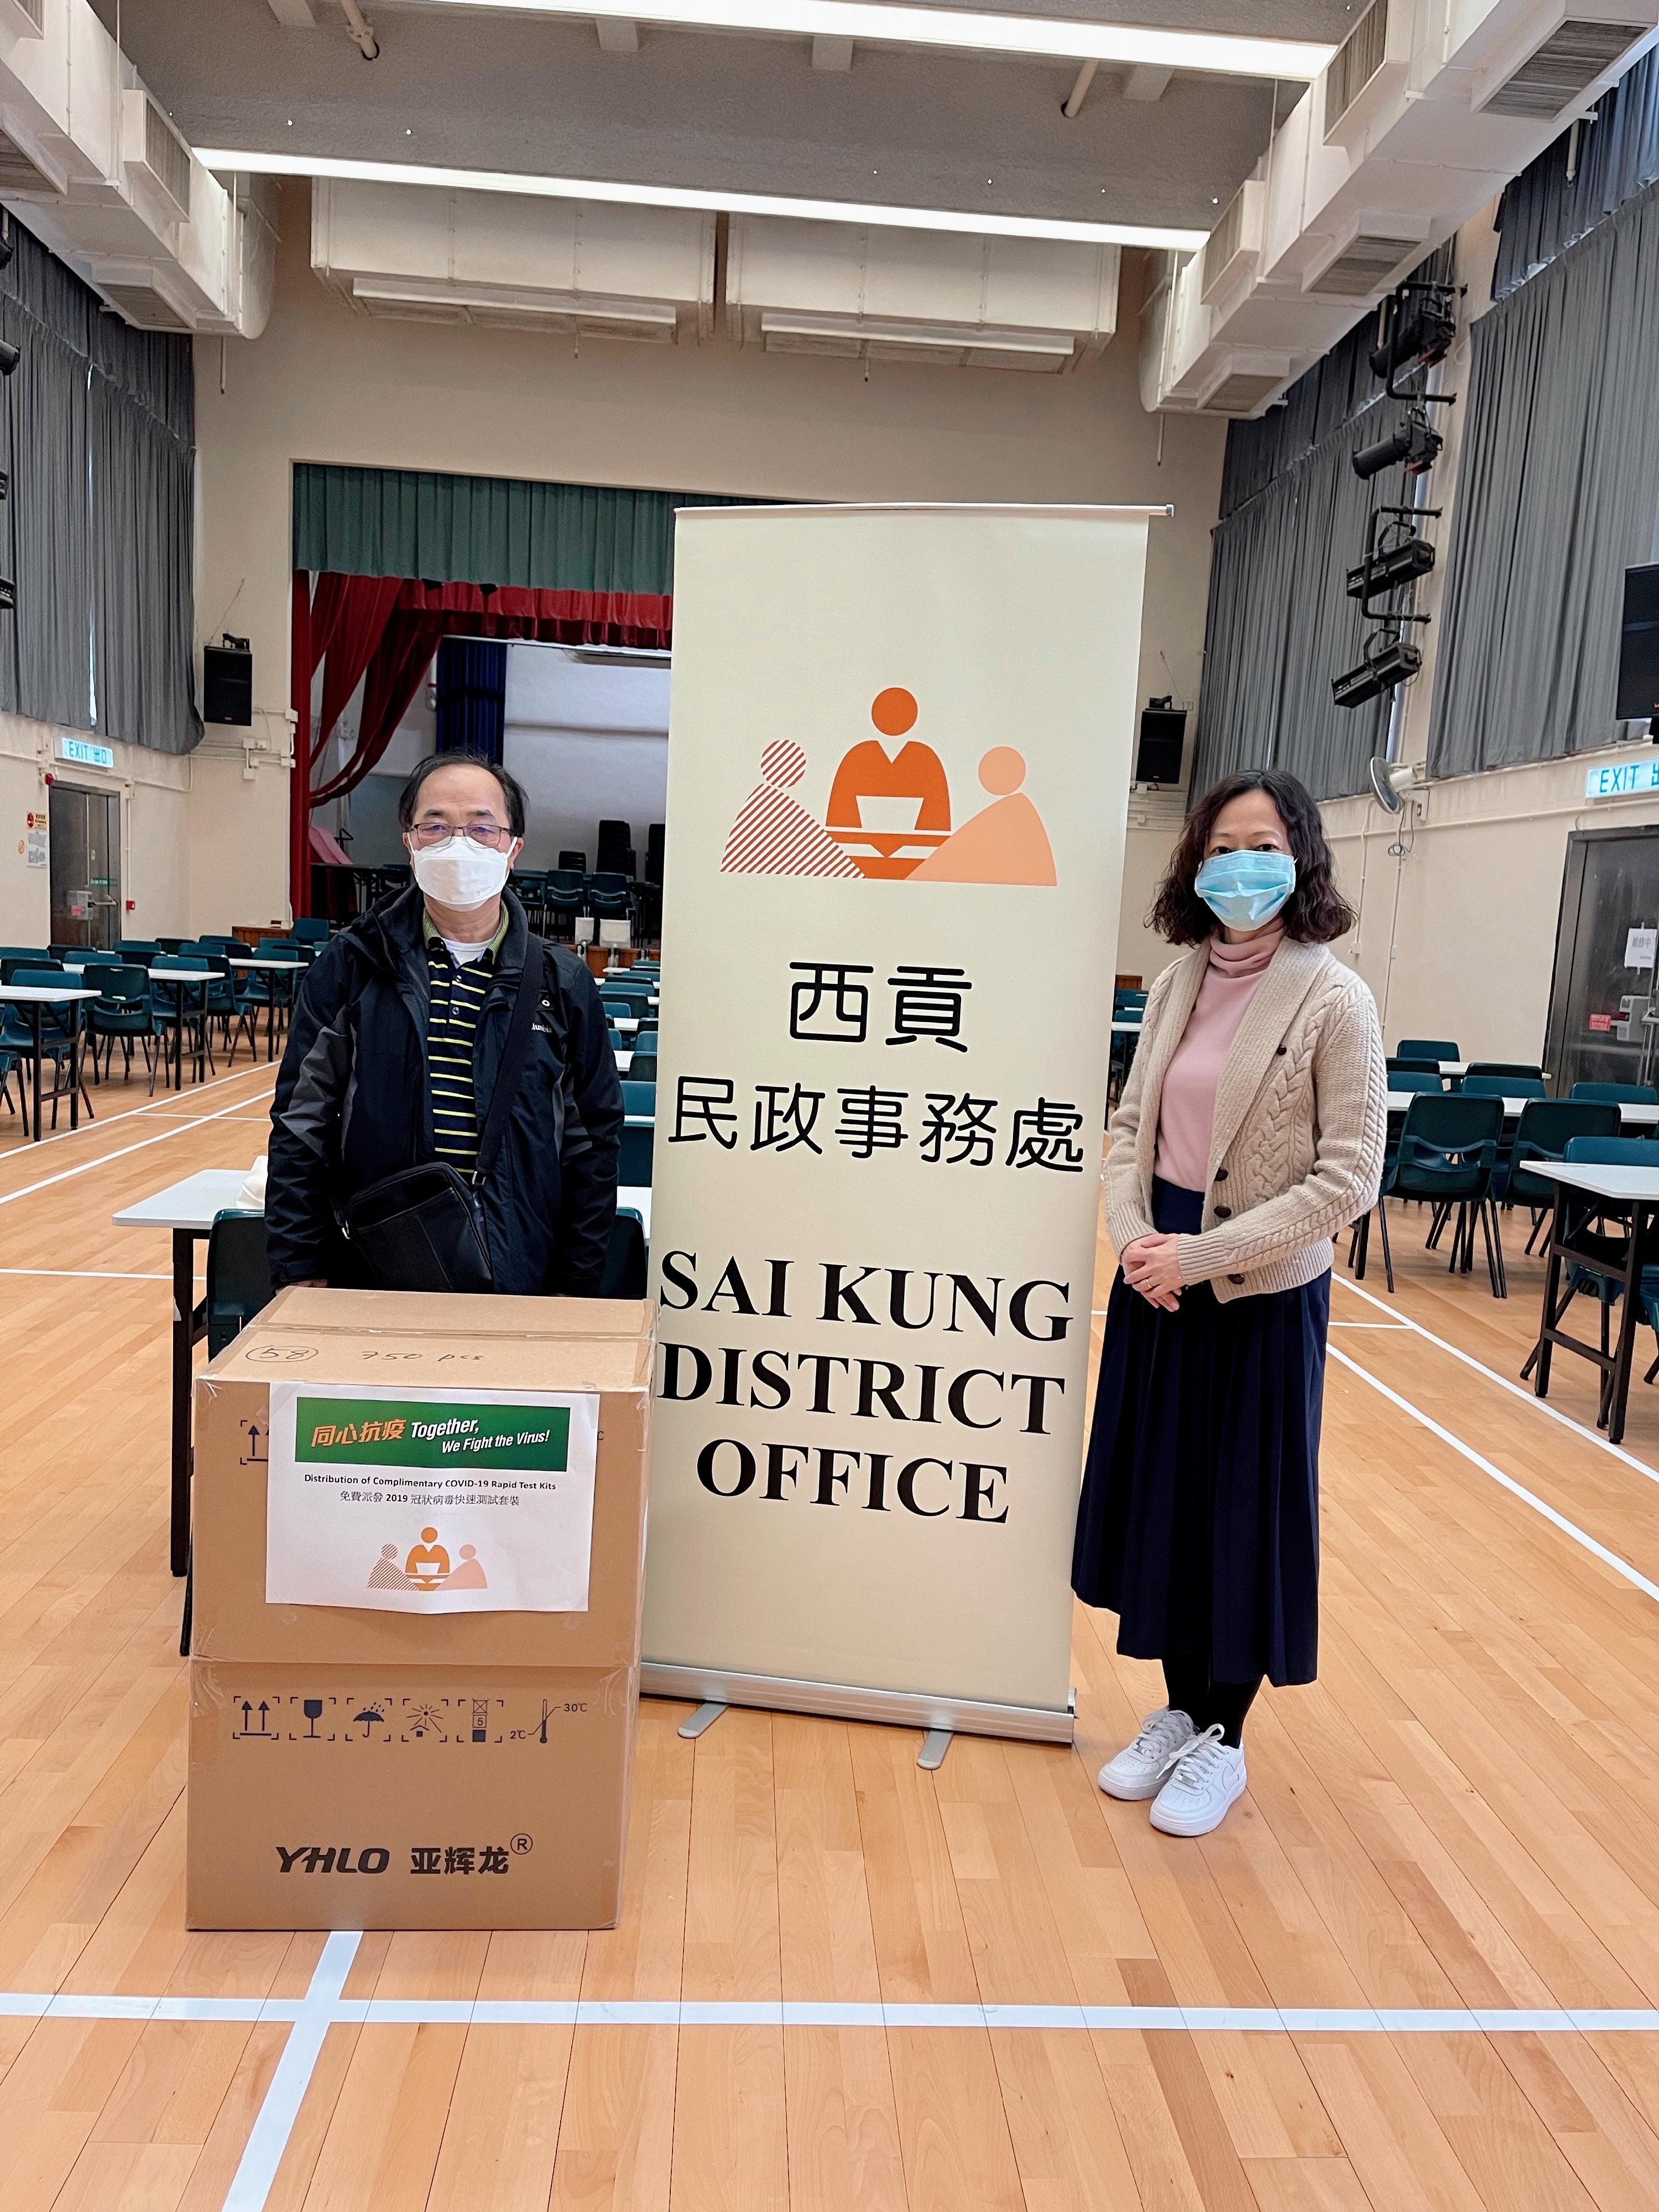 The Sai Kung District Office today (February 26) distributed COVID-19 rapid test kits to households, cleansing workers and property management staff living and working in Royal Diamond of The Wings II, Tseung Kwan O for voluntary testing through the property management company.